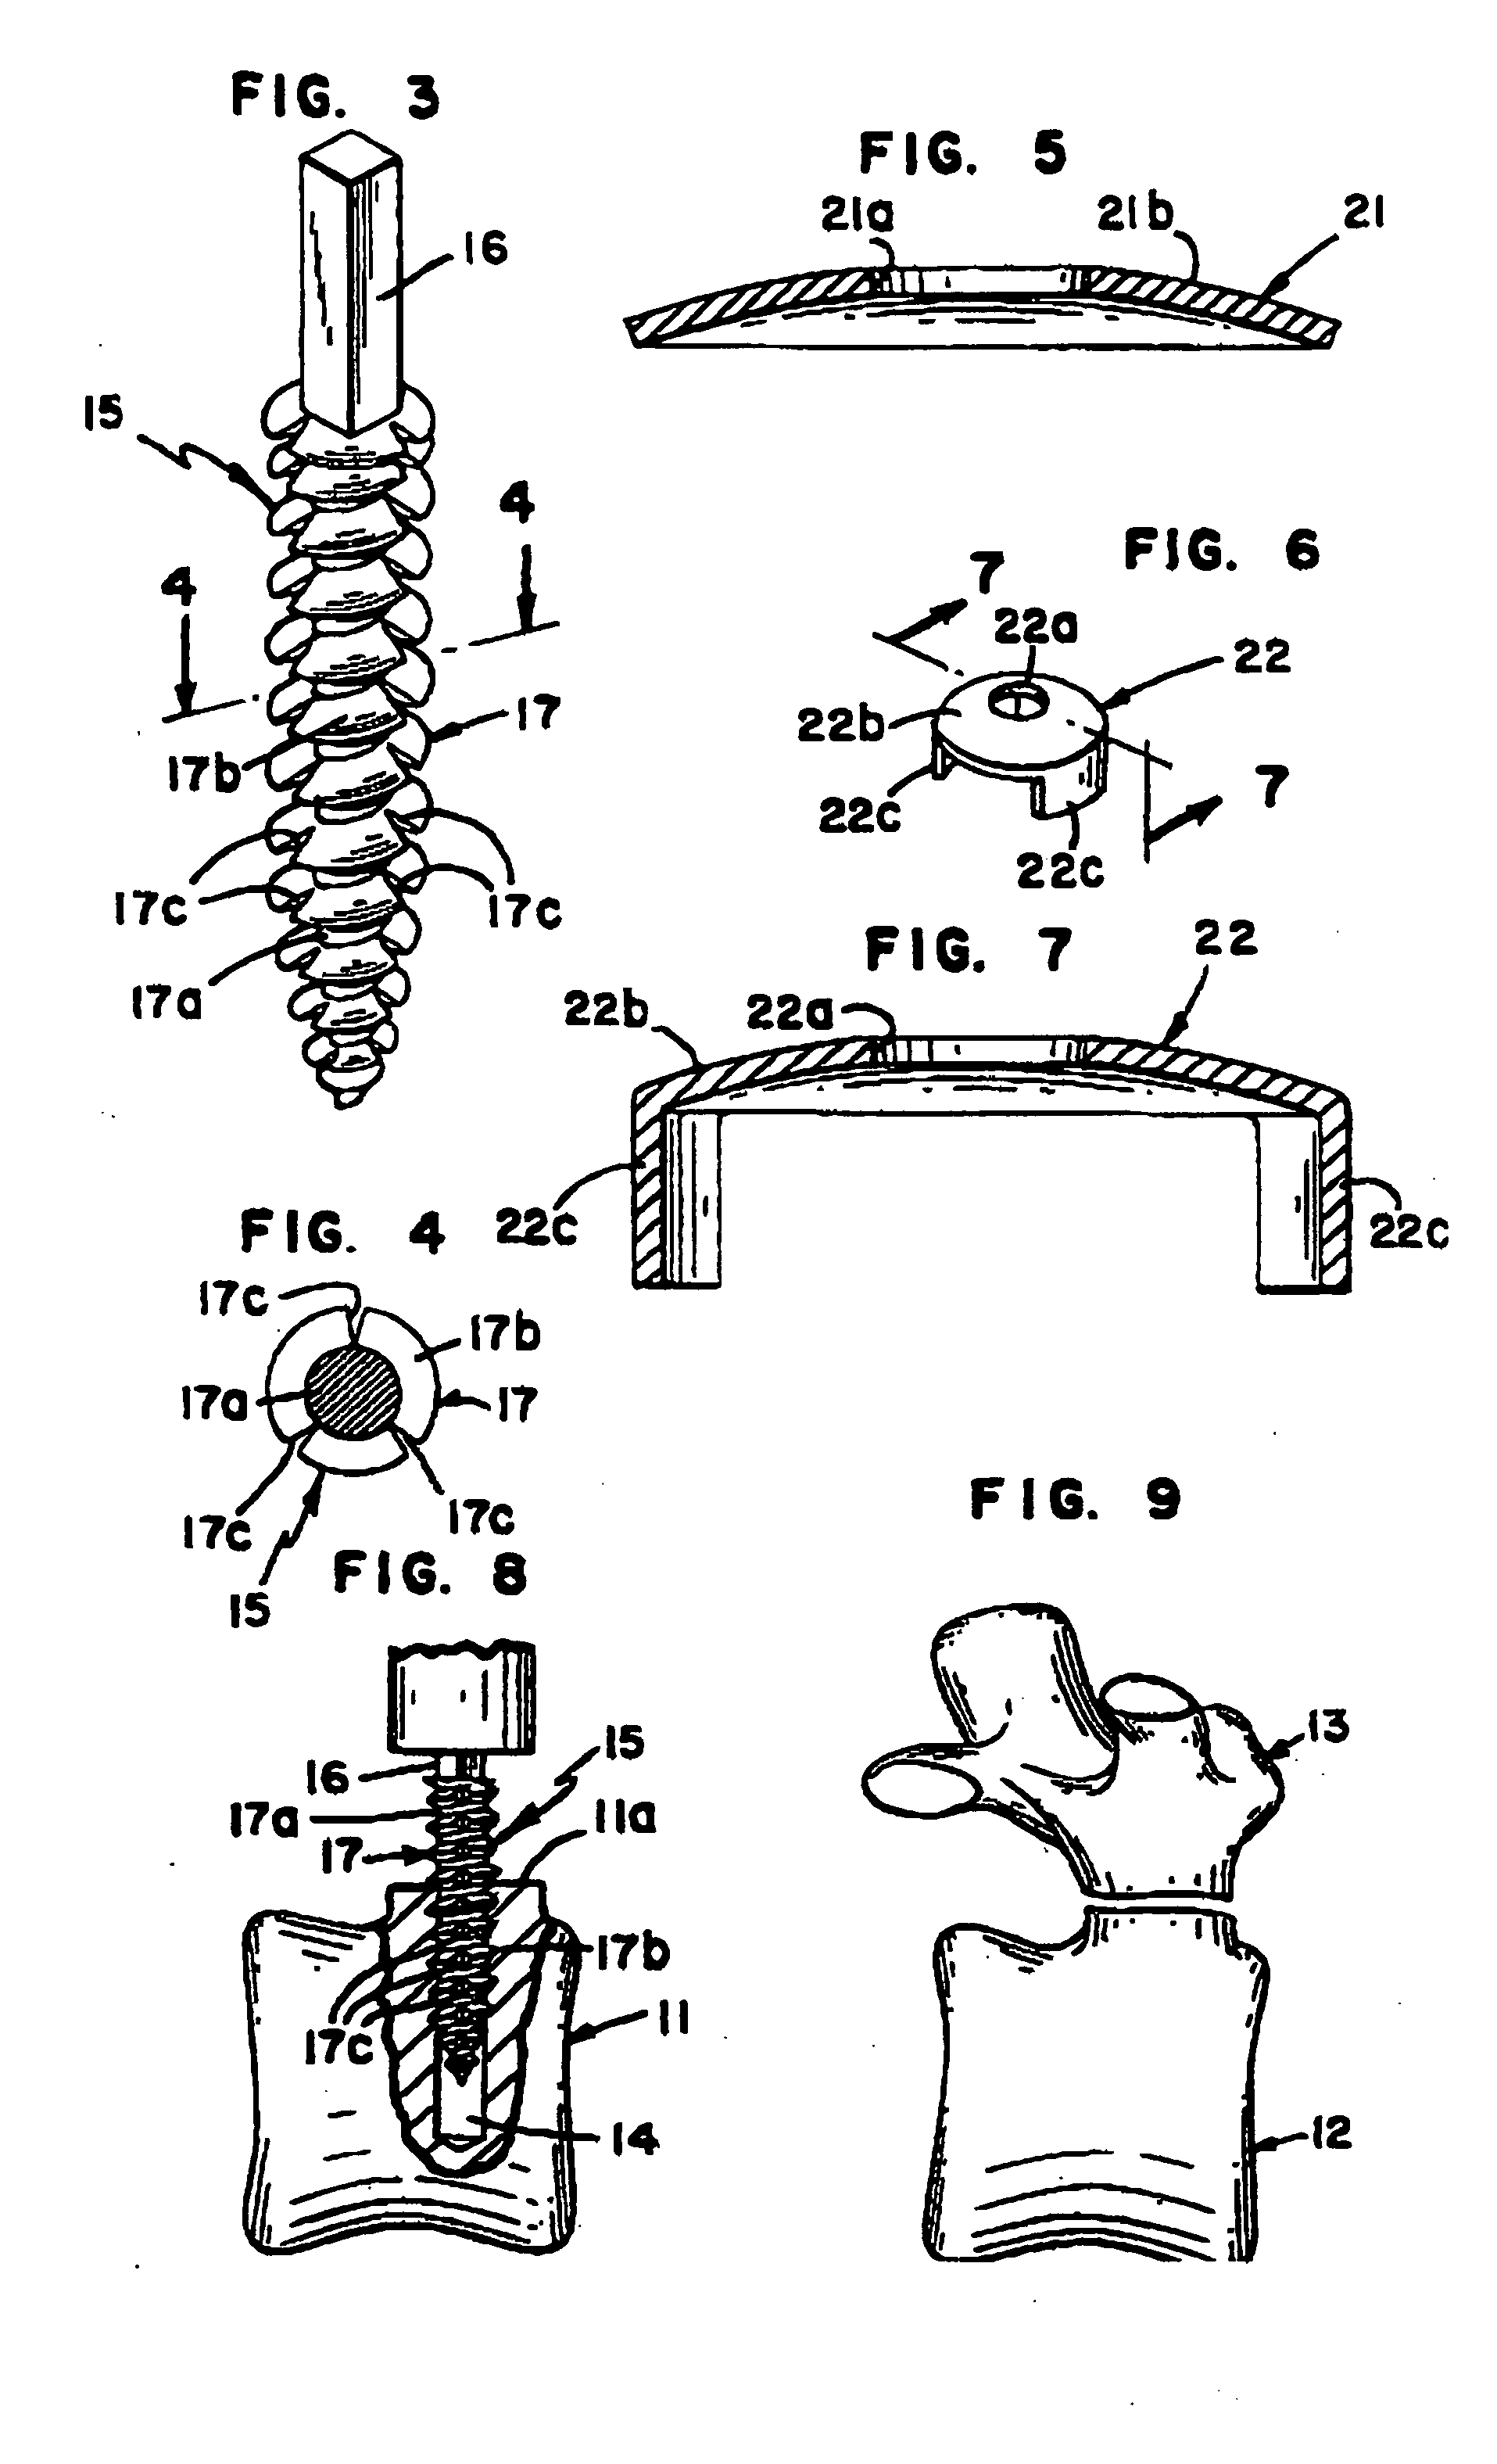 Integral flexible spine stabilization device and method